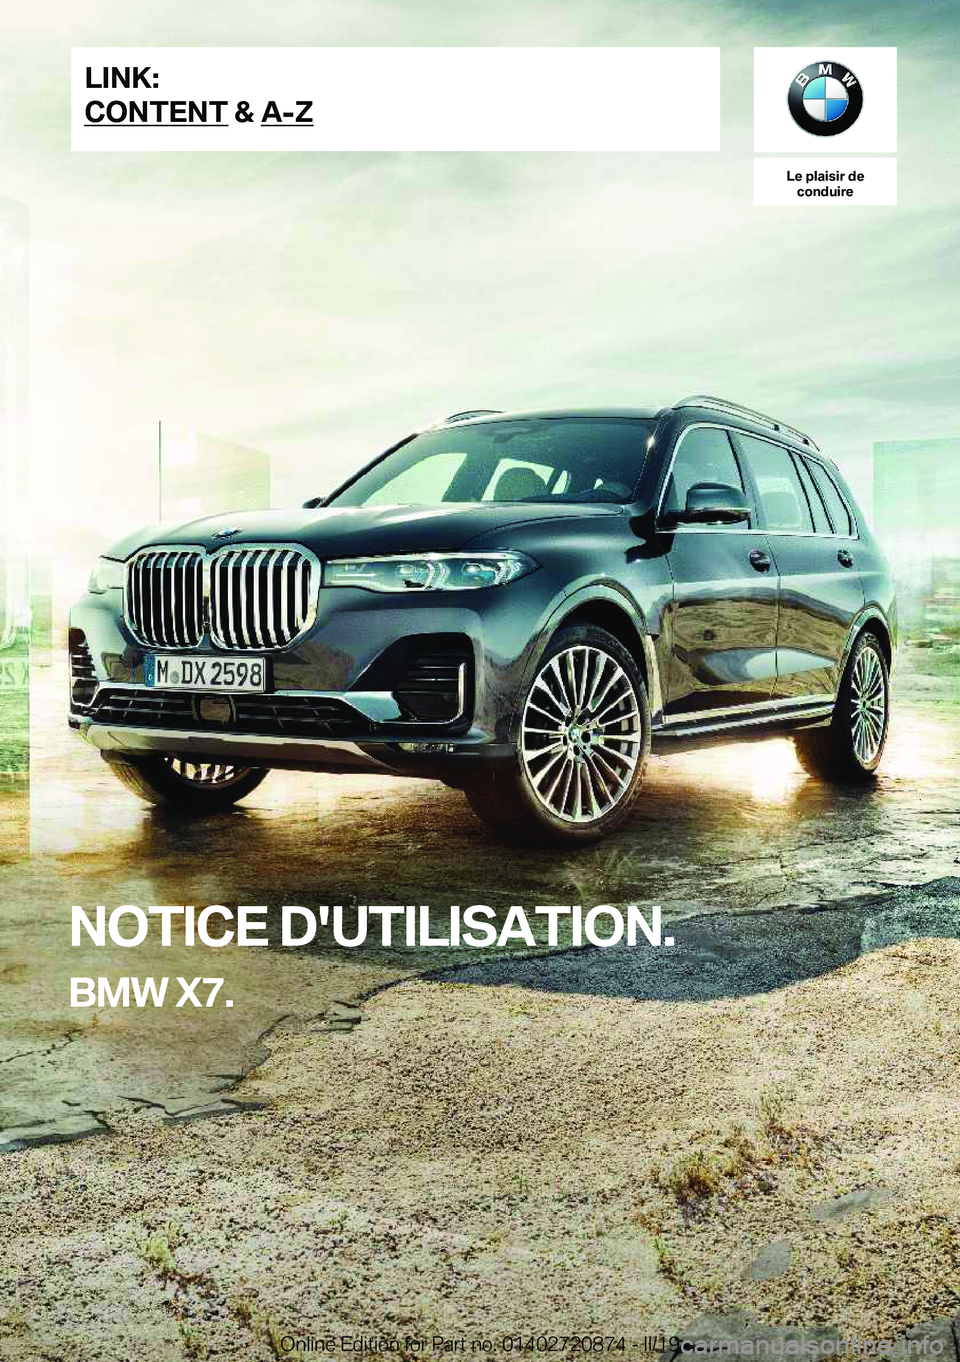 BMW X7 2019  Notices Demploi (in French) �L�e��p�l�a�i�s�i�r��d�e�c�o�n�d�u�i�r�e
�N�O�T�I�C�E��D�'�U�T�I�L�I�S�A�T�I�O�N�.
�B�M�W��X�7�.�L�I�N�K�:
�C�O�N�T�E�N�T��&��A�-�Z�O�n�l�i�n�e��E�d�i�t�i�o�n��f�o�r��P�a�r�t��n�o�.��0�